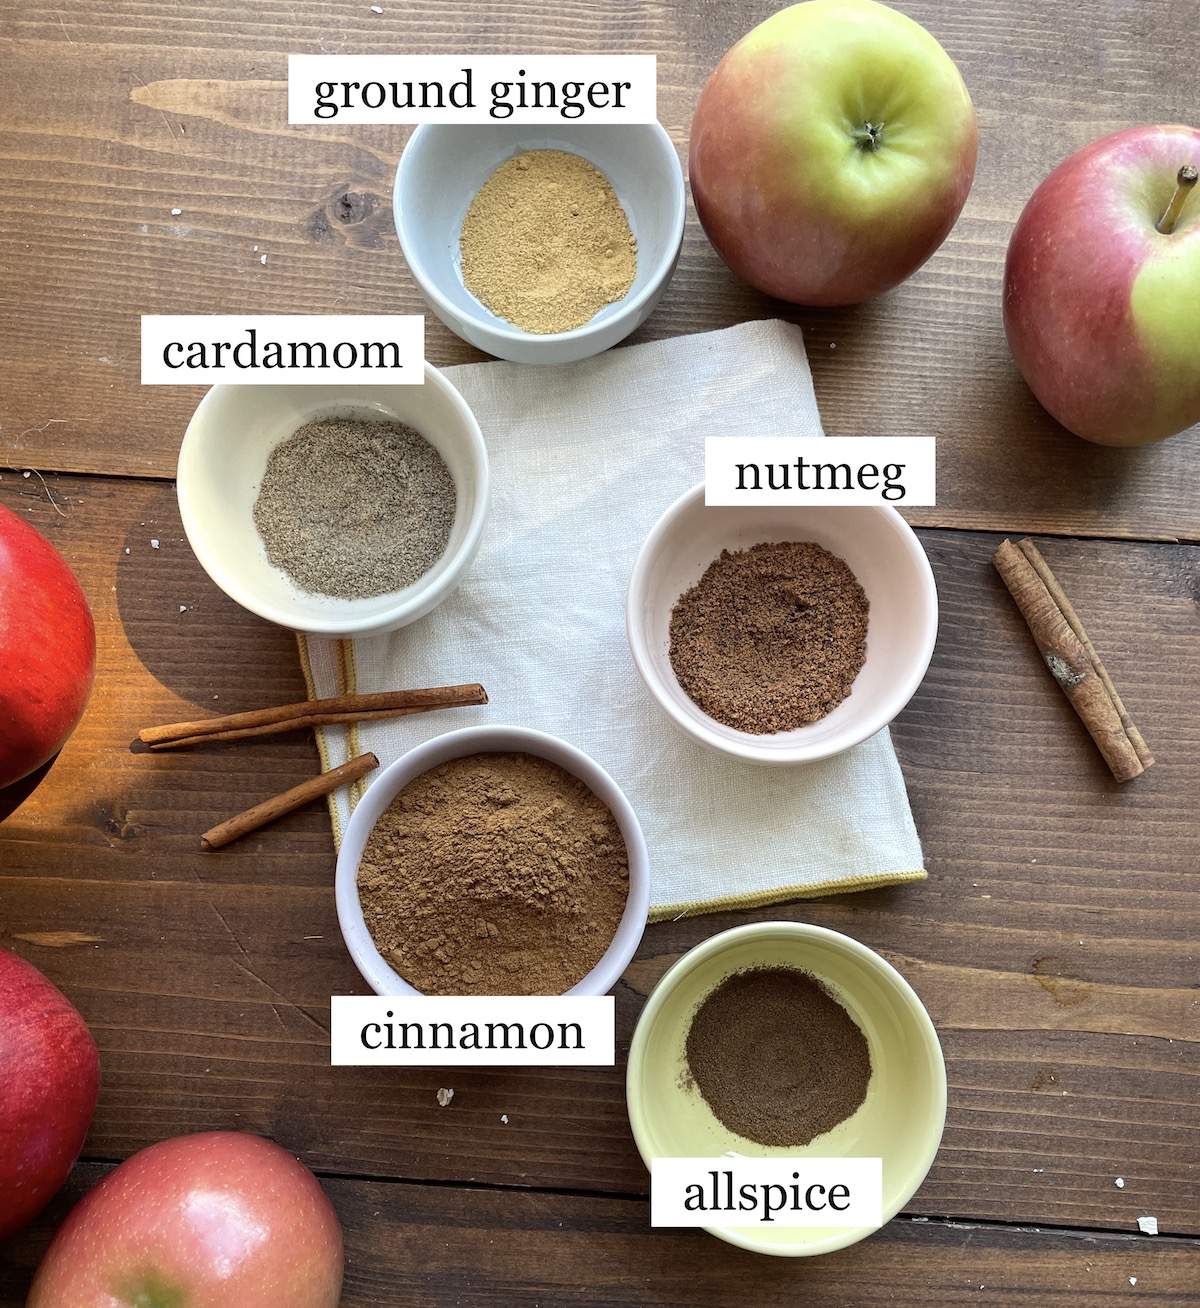 The ingredients in apple pie spice laid out and labeled.